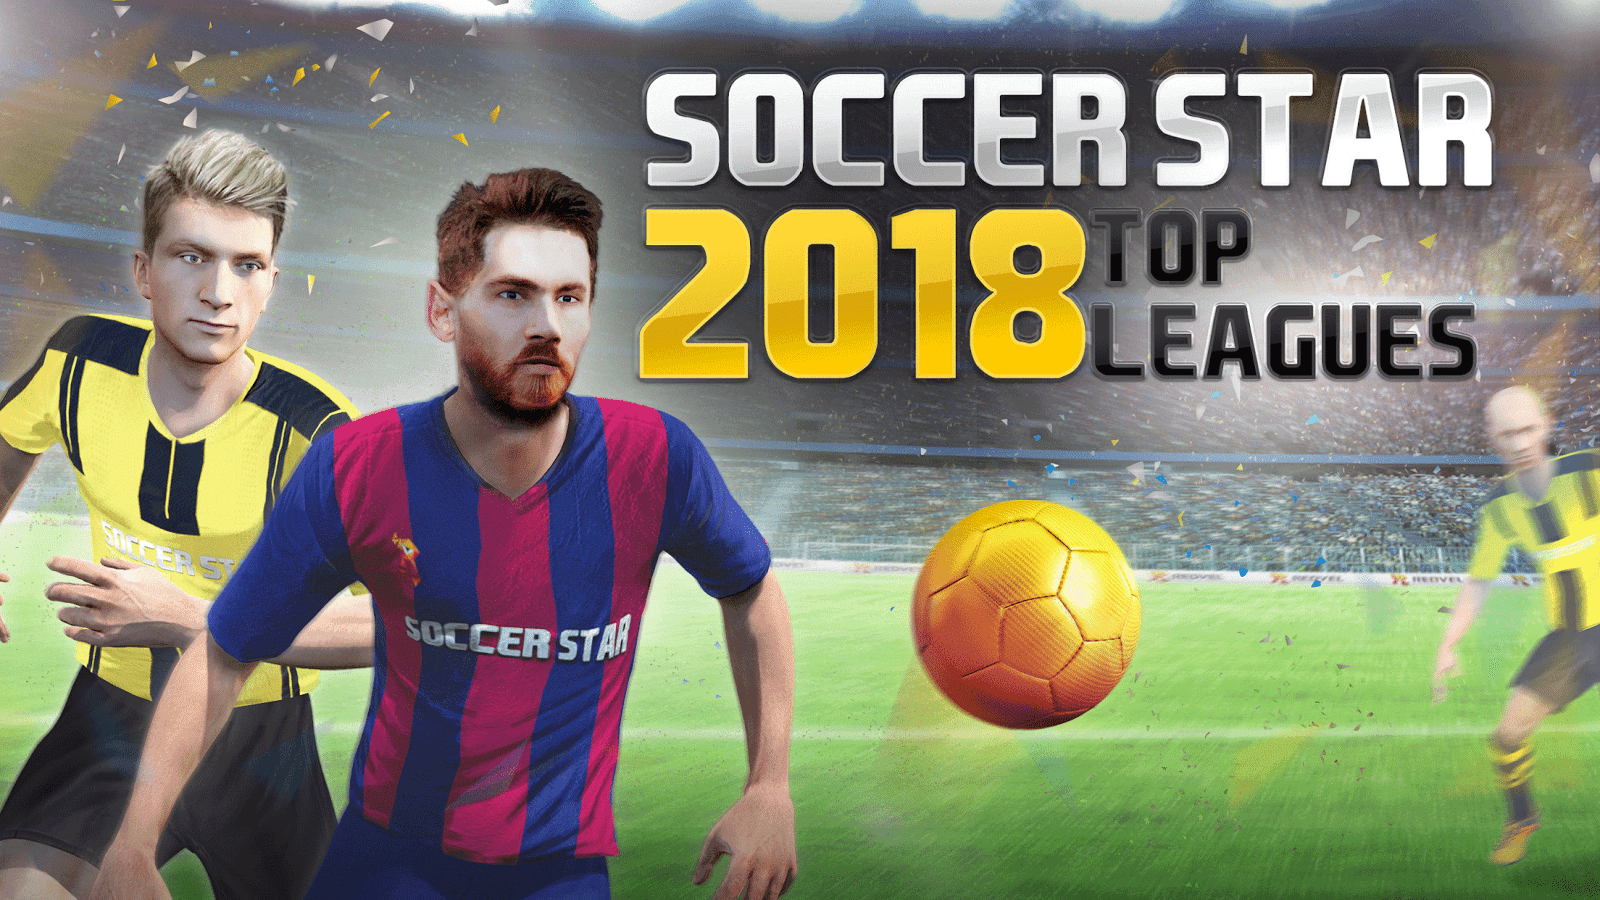 Knowledge Is Everything Download Soccer Star 2018 Top Leagues Mod Apk